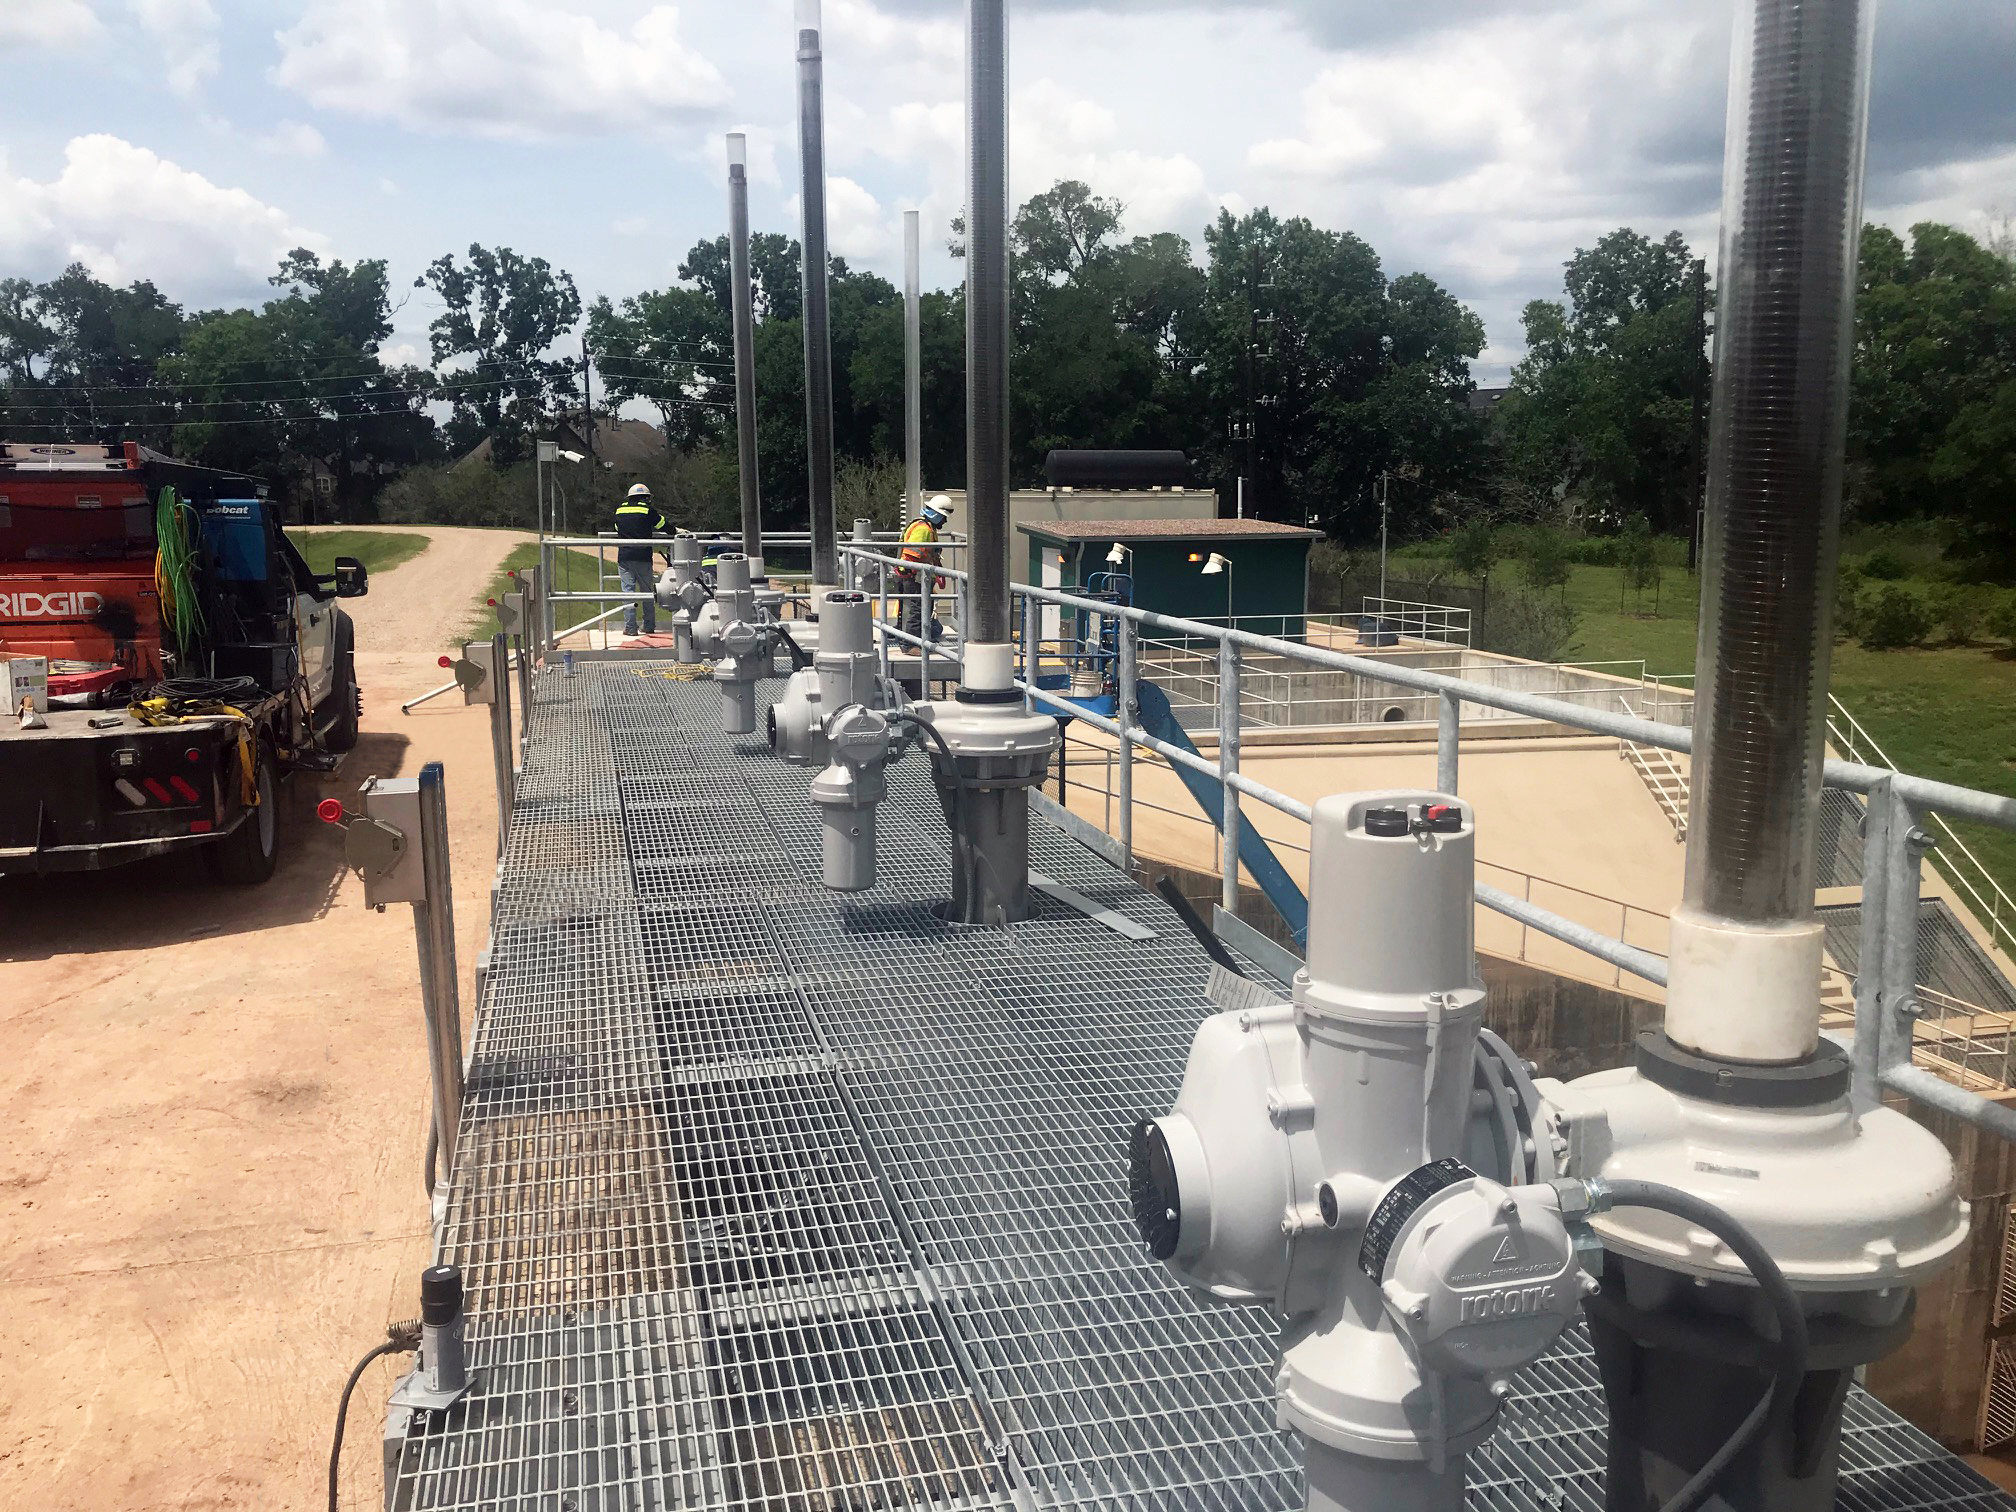 The electric IQ actuators with IB gearboxes are used on top of sluice gates, ready to close them during periods of excessive rainfall and flooding.